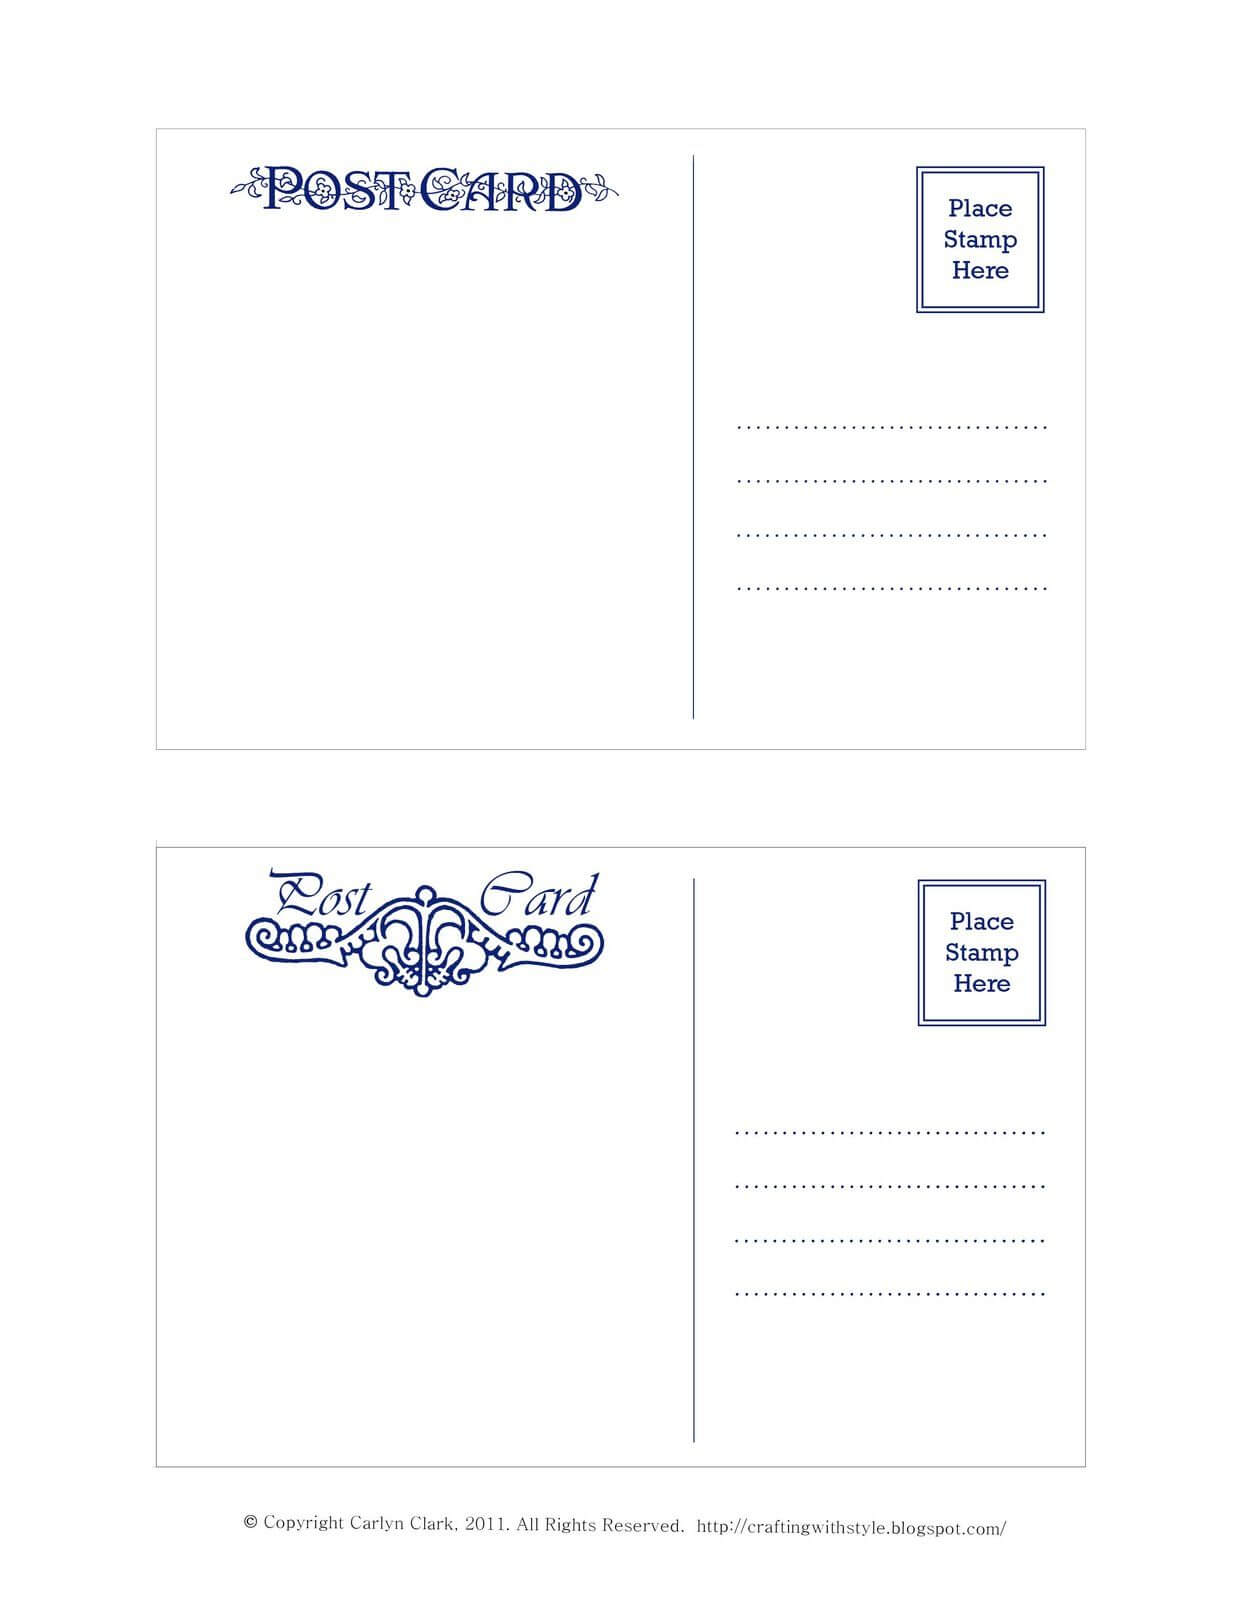 Crafting With Style: Free Postcard Templates | Free Inside Post Cards Template